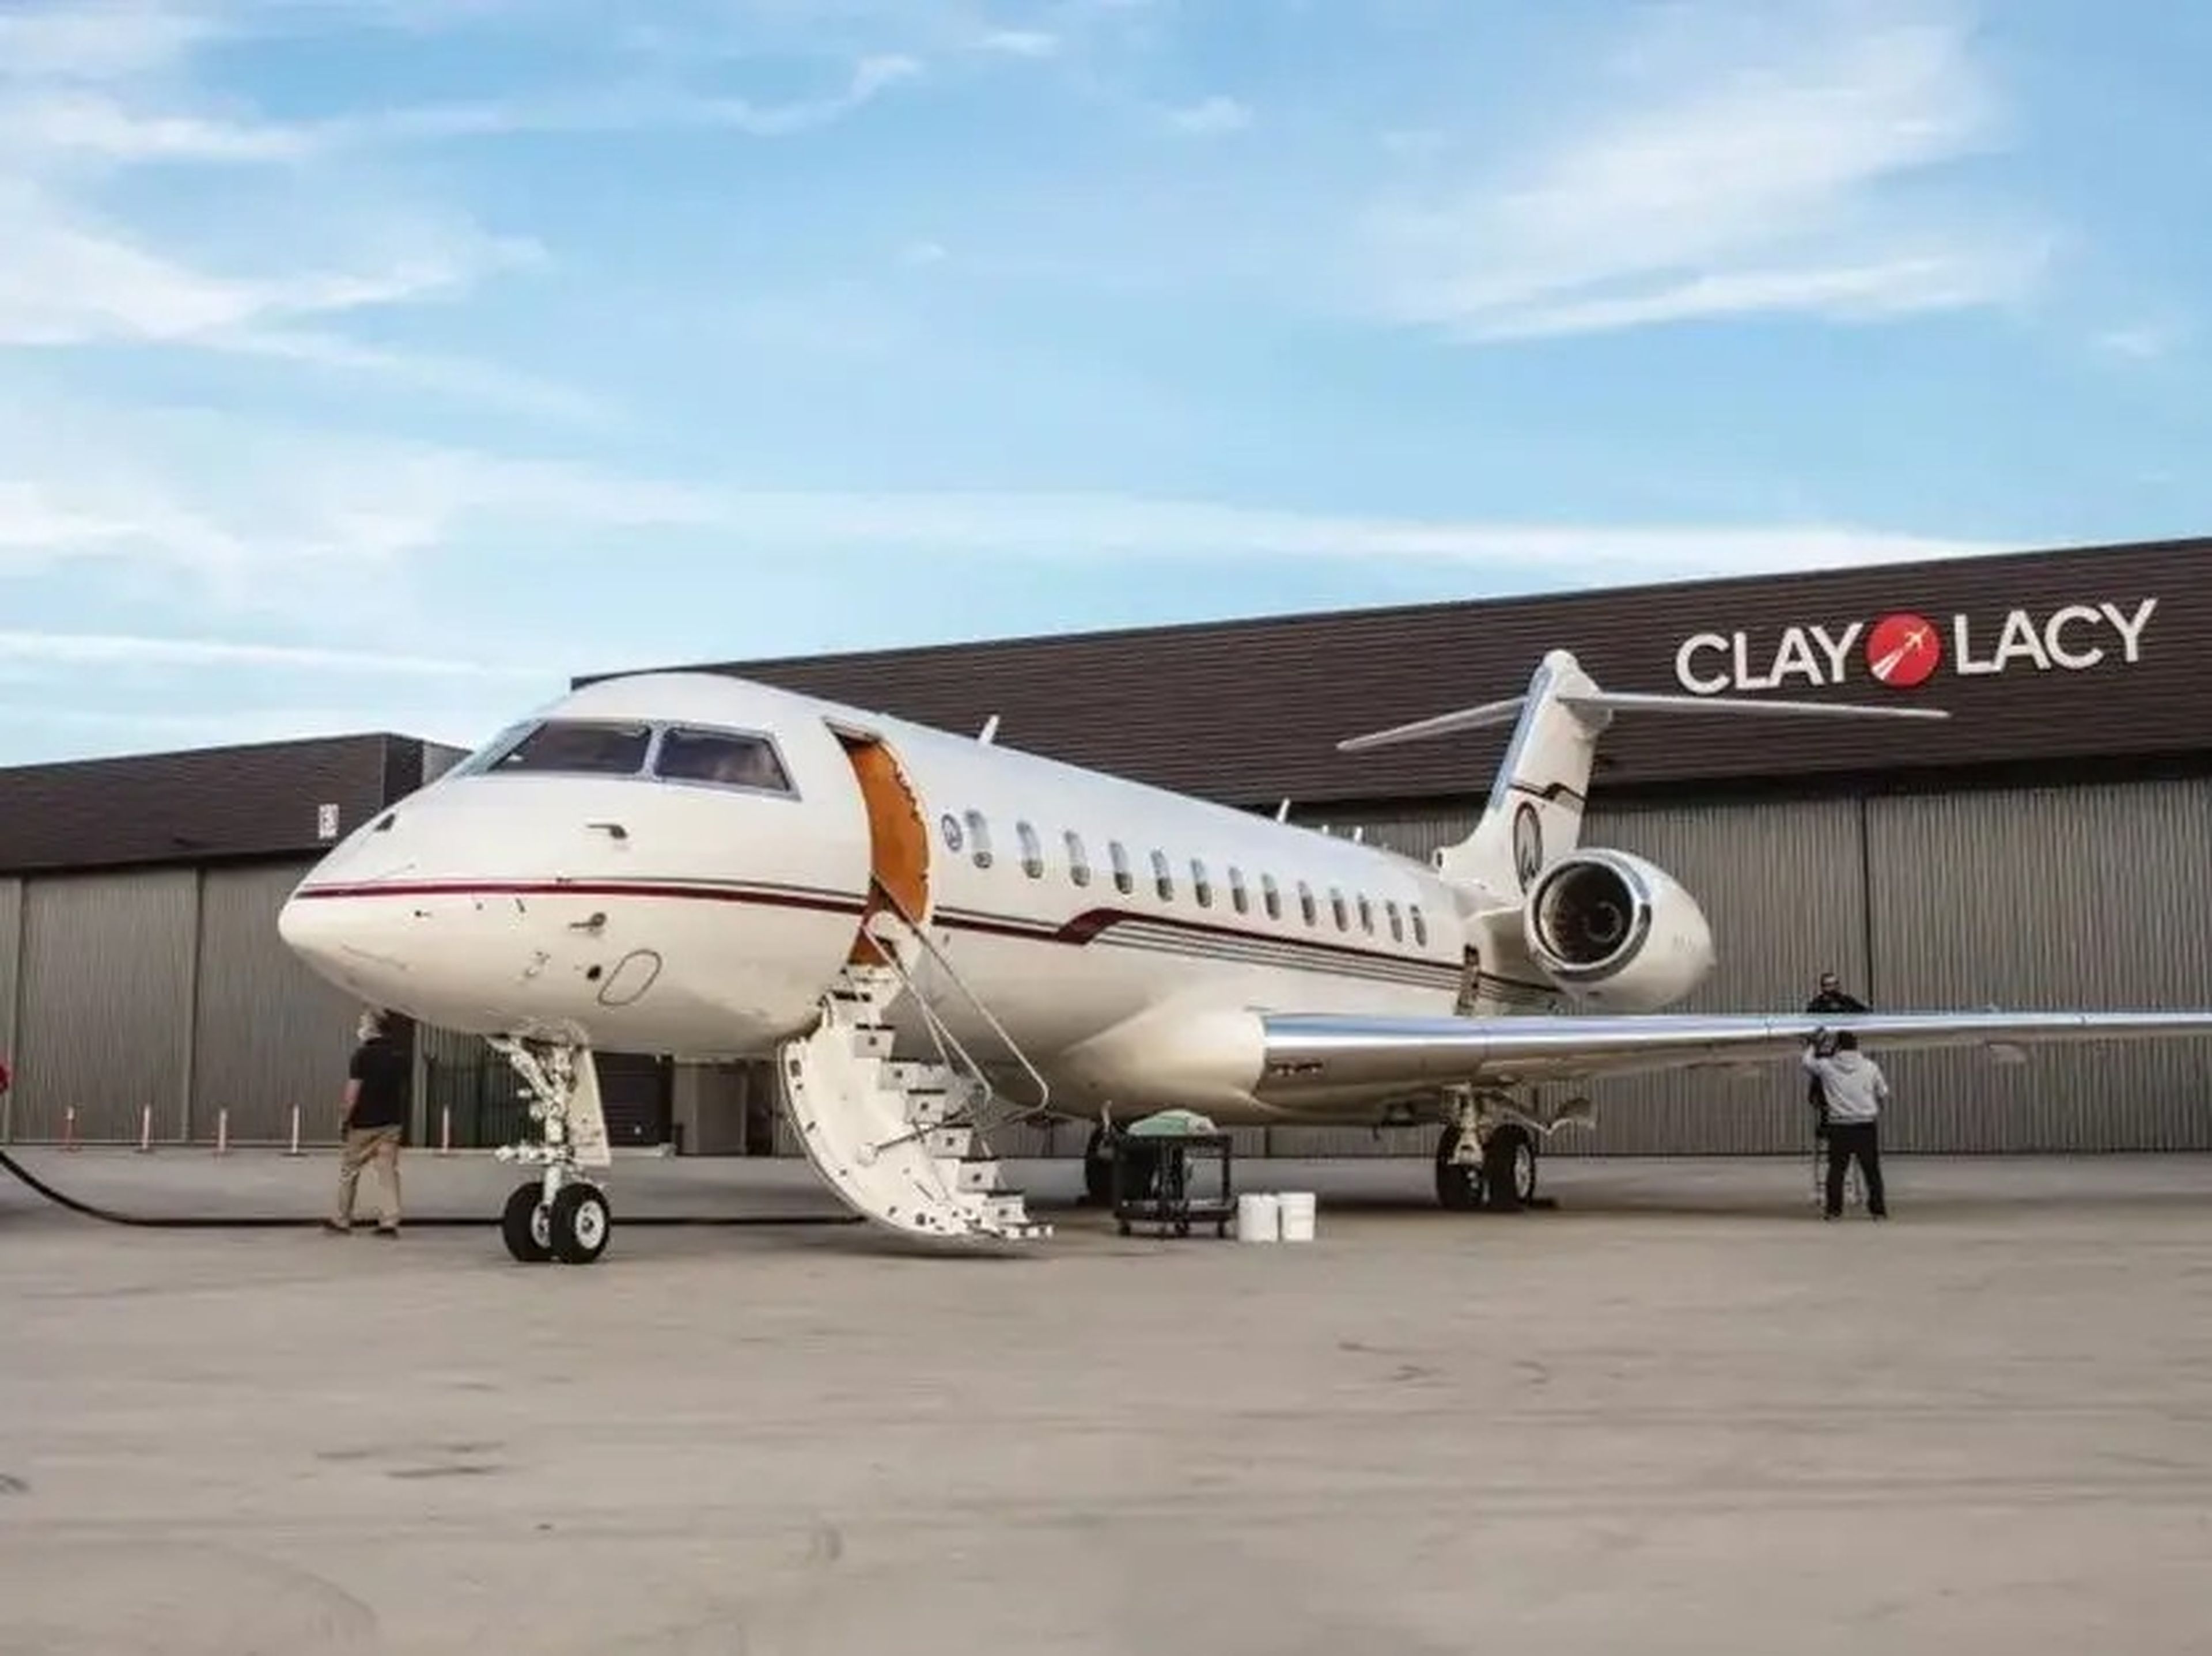 Mark Wahlberg's Bombardier Global Express jet.